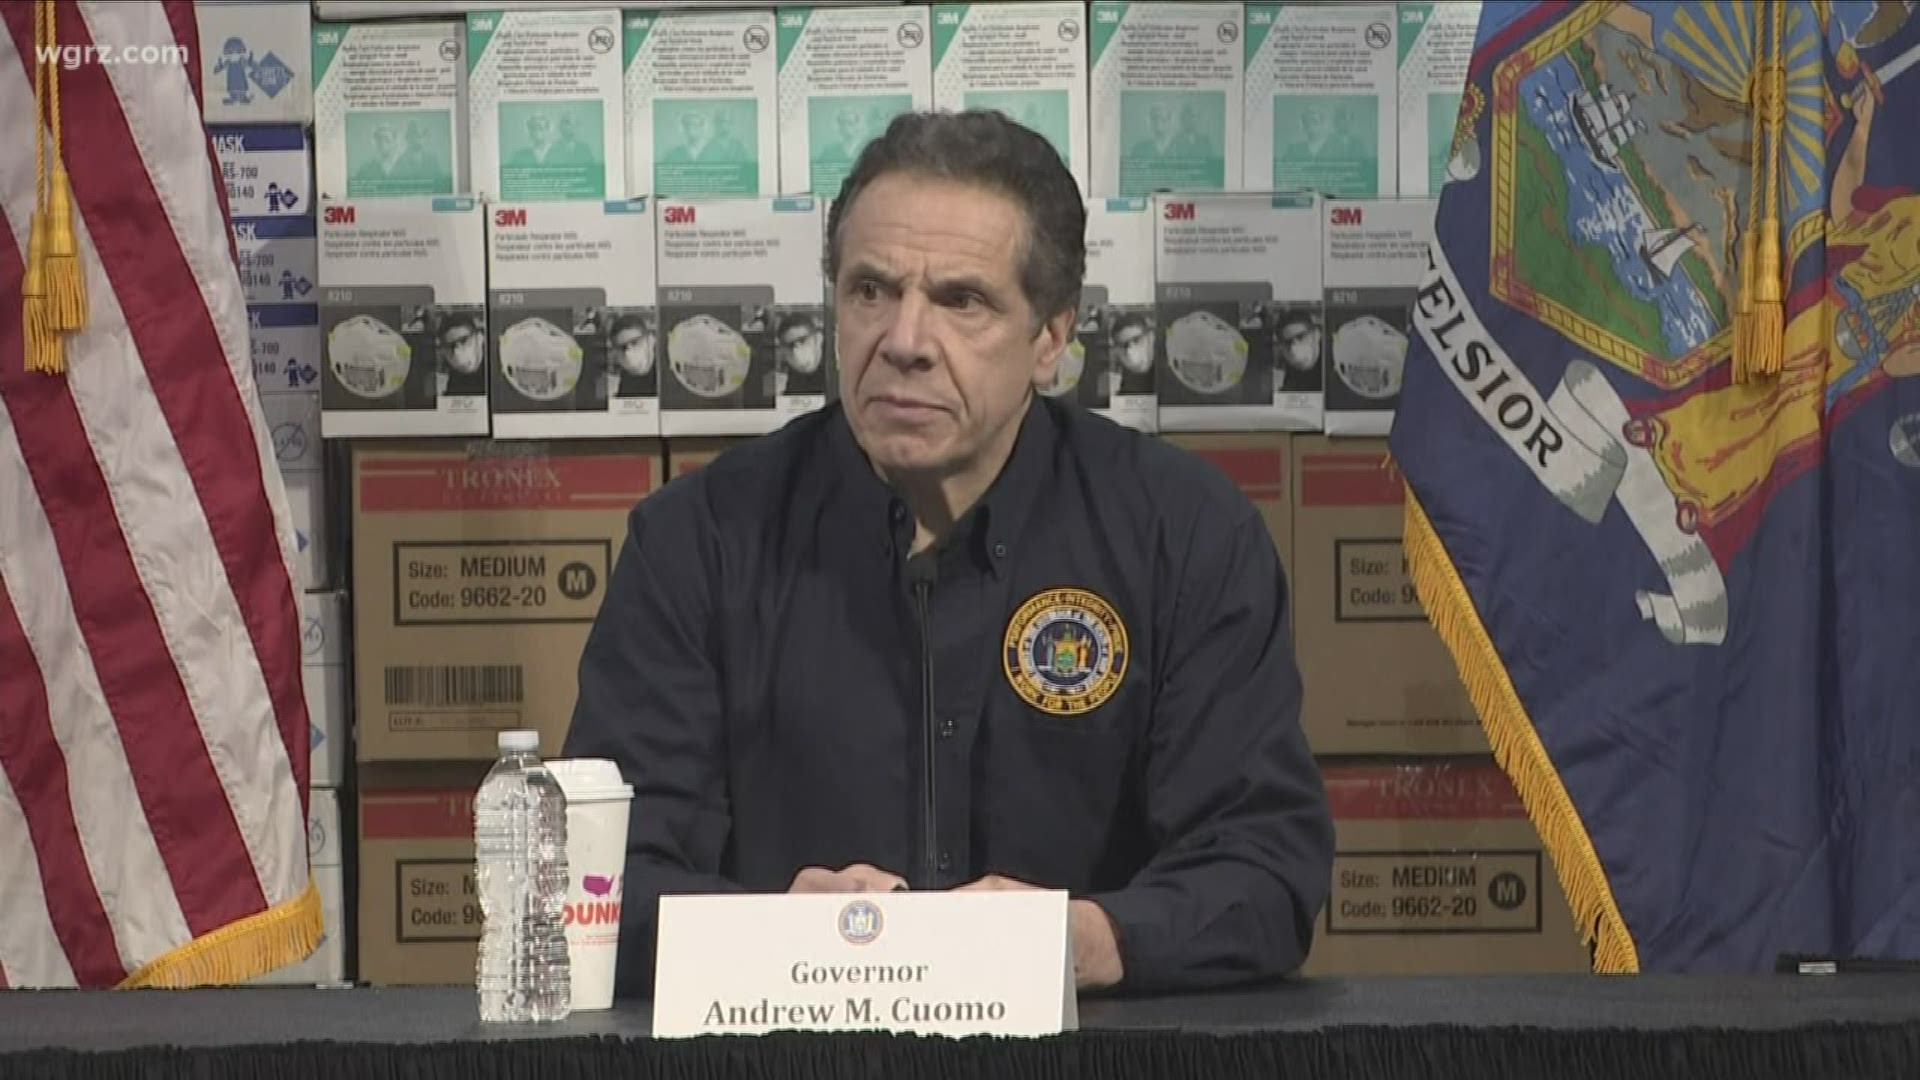 Cuomo is asking for federal assistance to prioritize New York... because it's currently the hardest hit area..